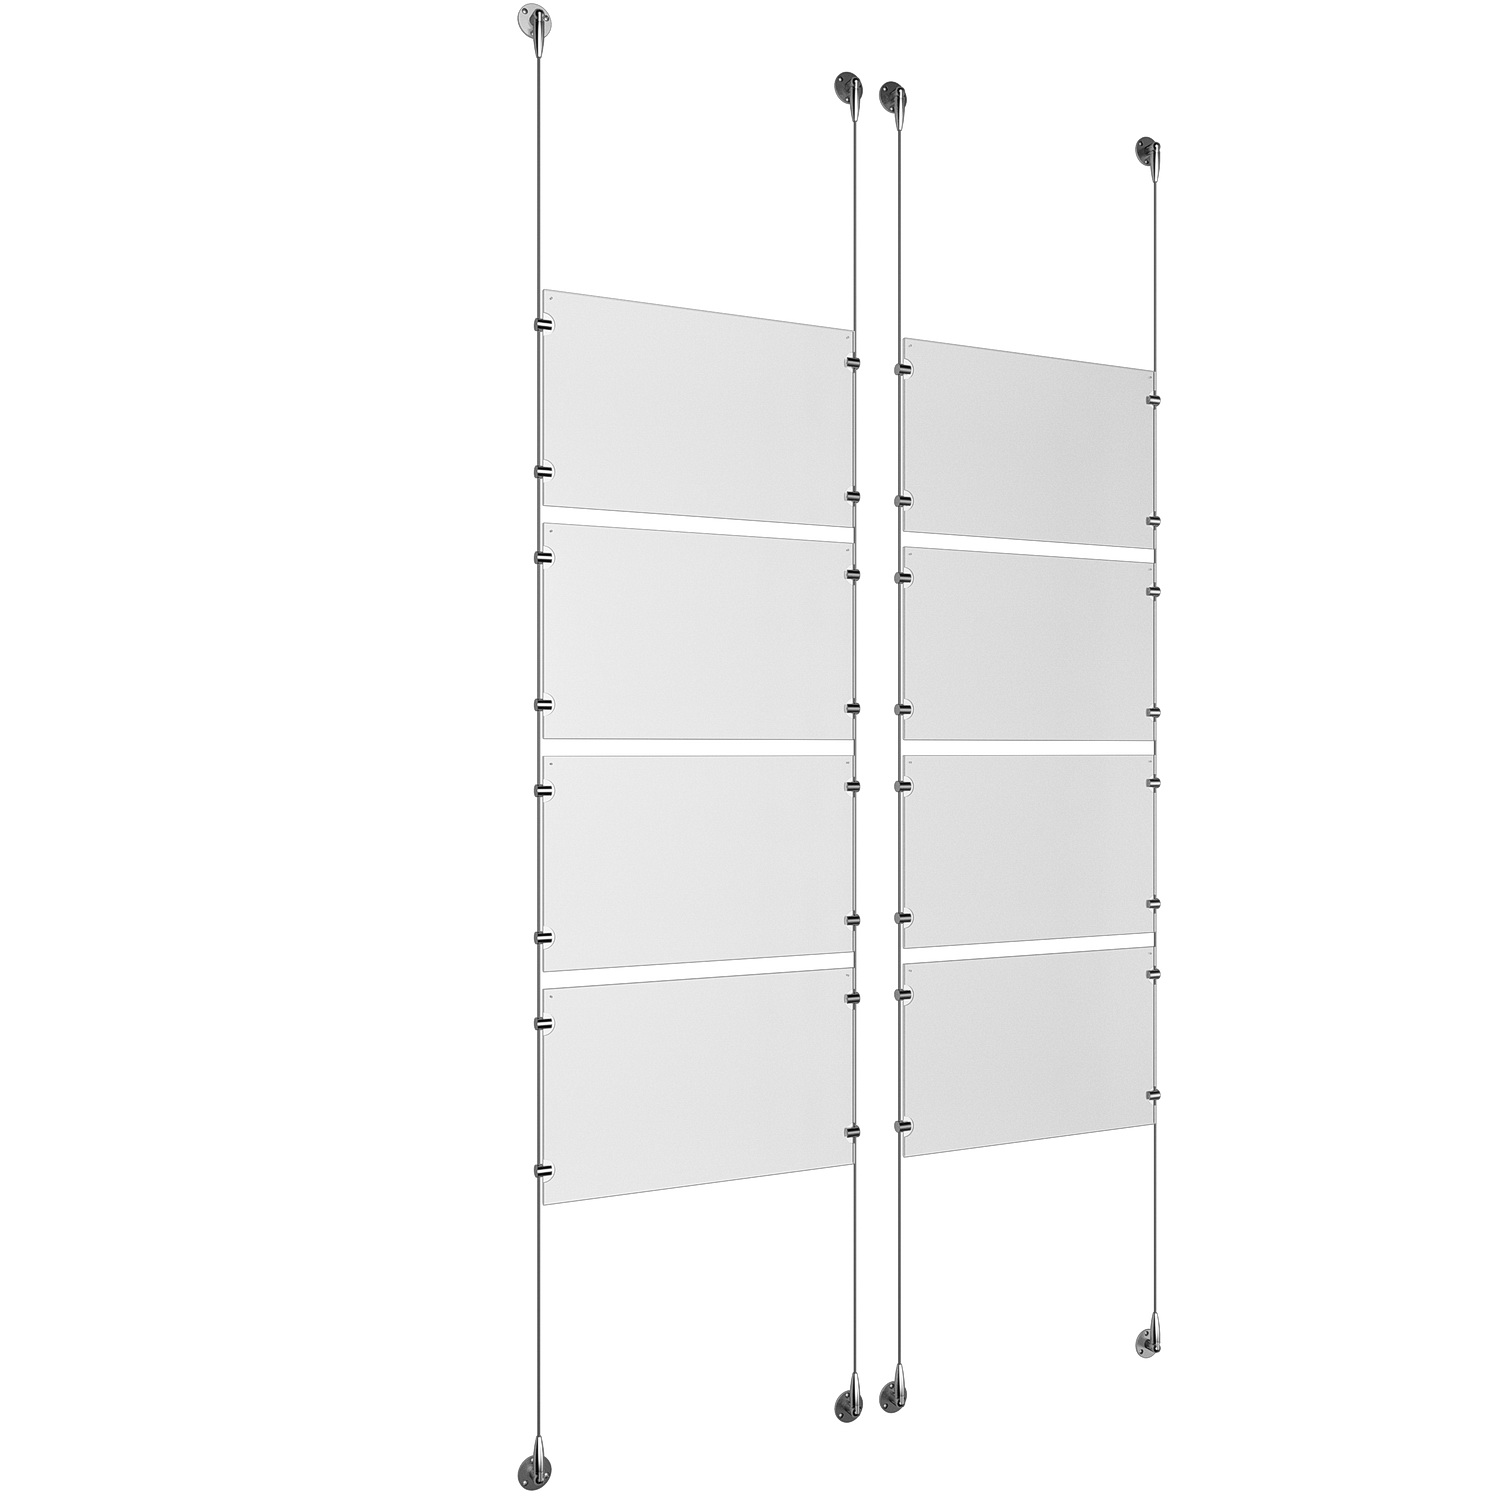 (8) 17'' Width x 11'' Height Clear Acrylic Frame & (4) Aluminum Clear Anodized Adjustable Angle Signature 1/8'' Diameter Cable Systems with (32) Single-Sided Panel Grippers